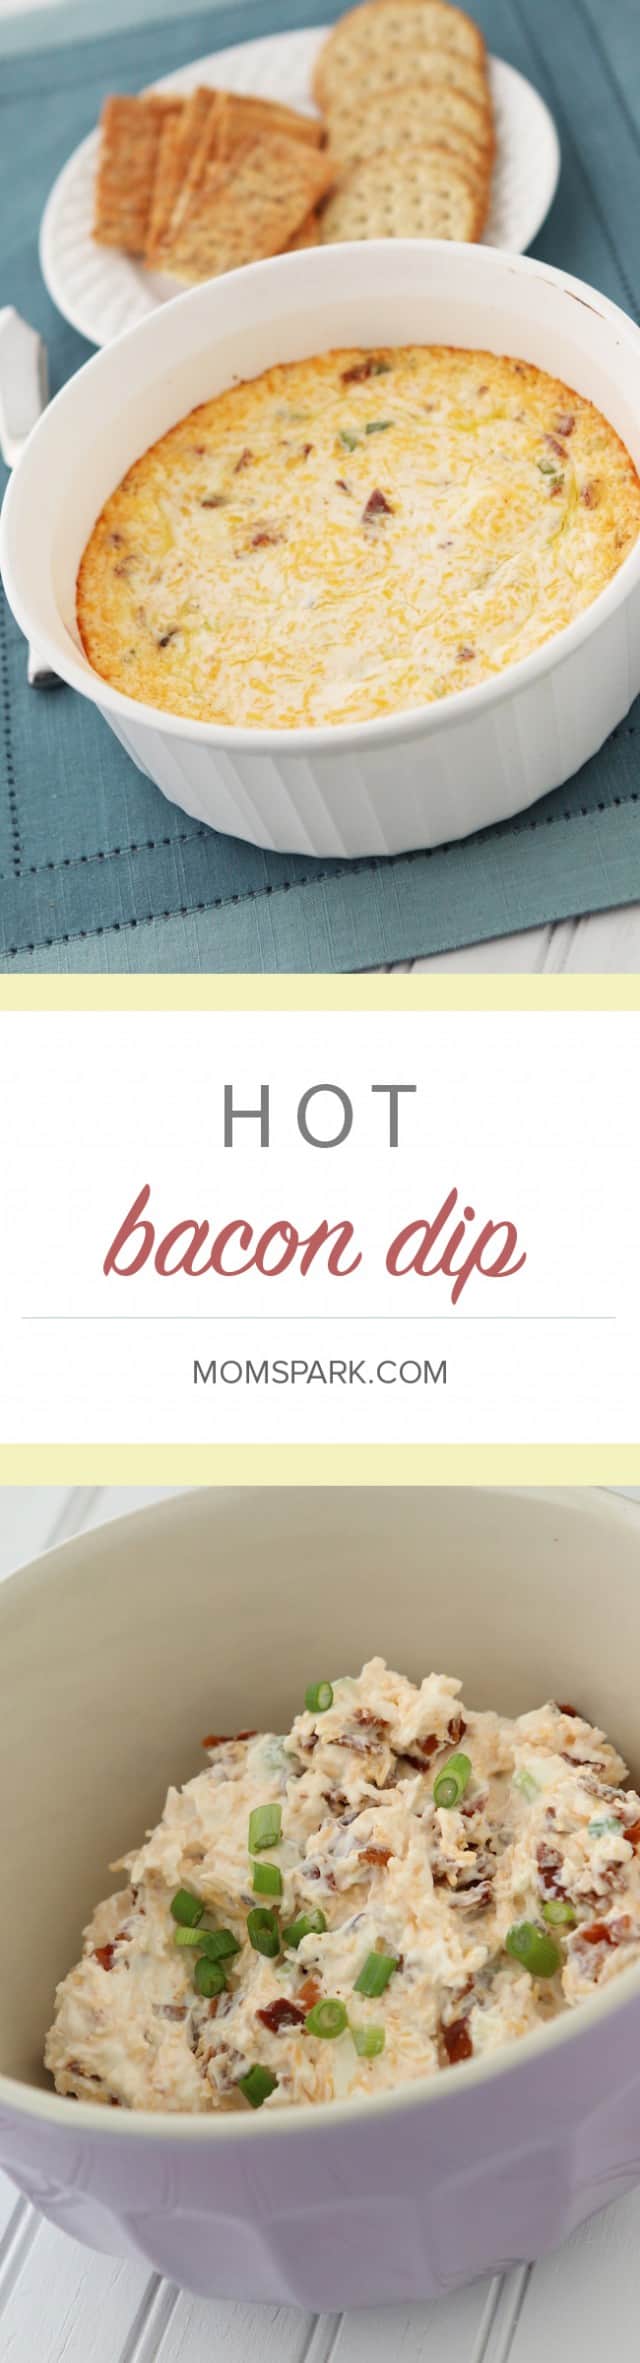 Hot Bacon Dip Recipe - Perfect for Game Day